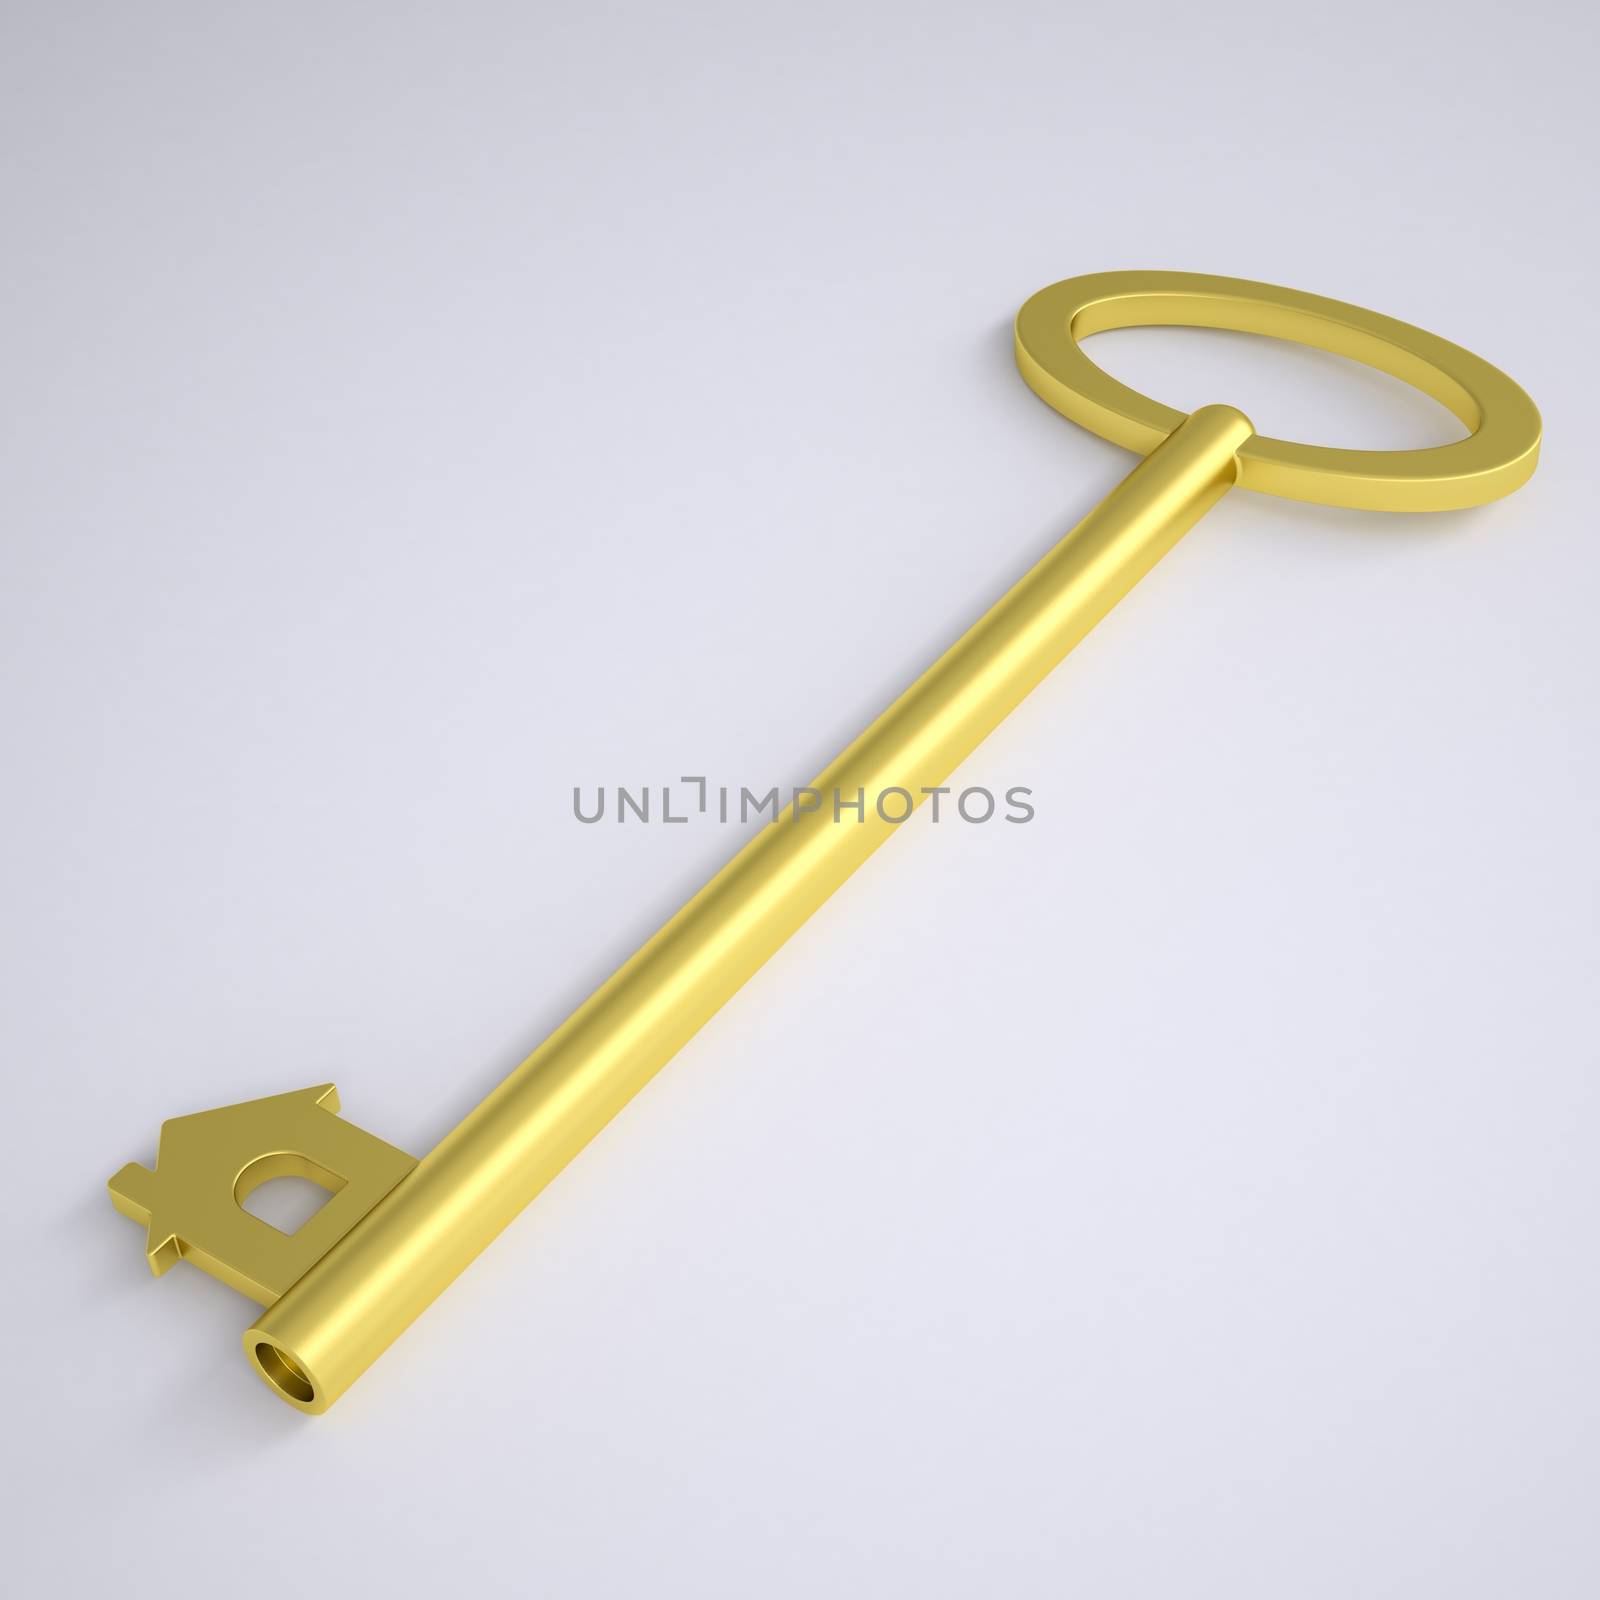 Key with home icon. Render on a gray background